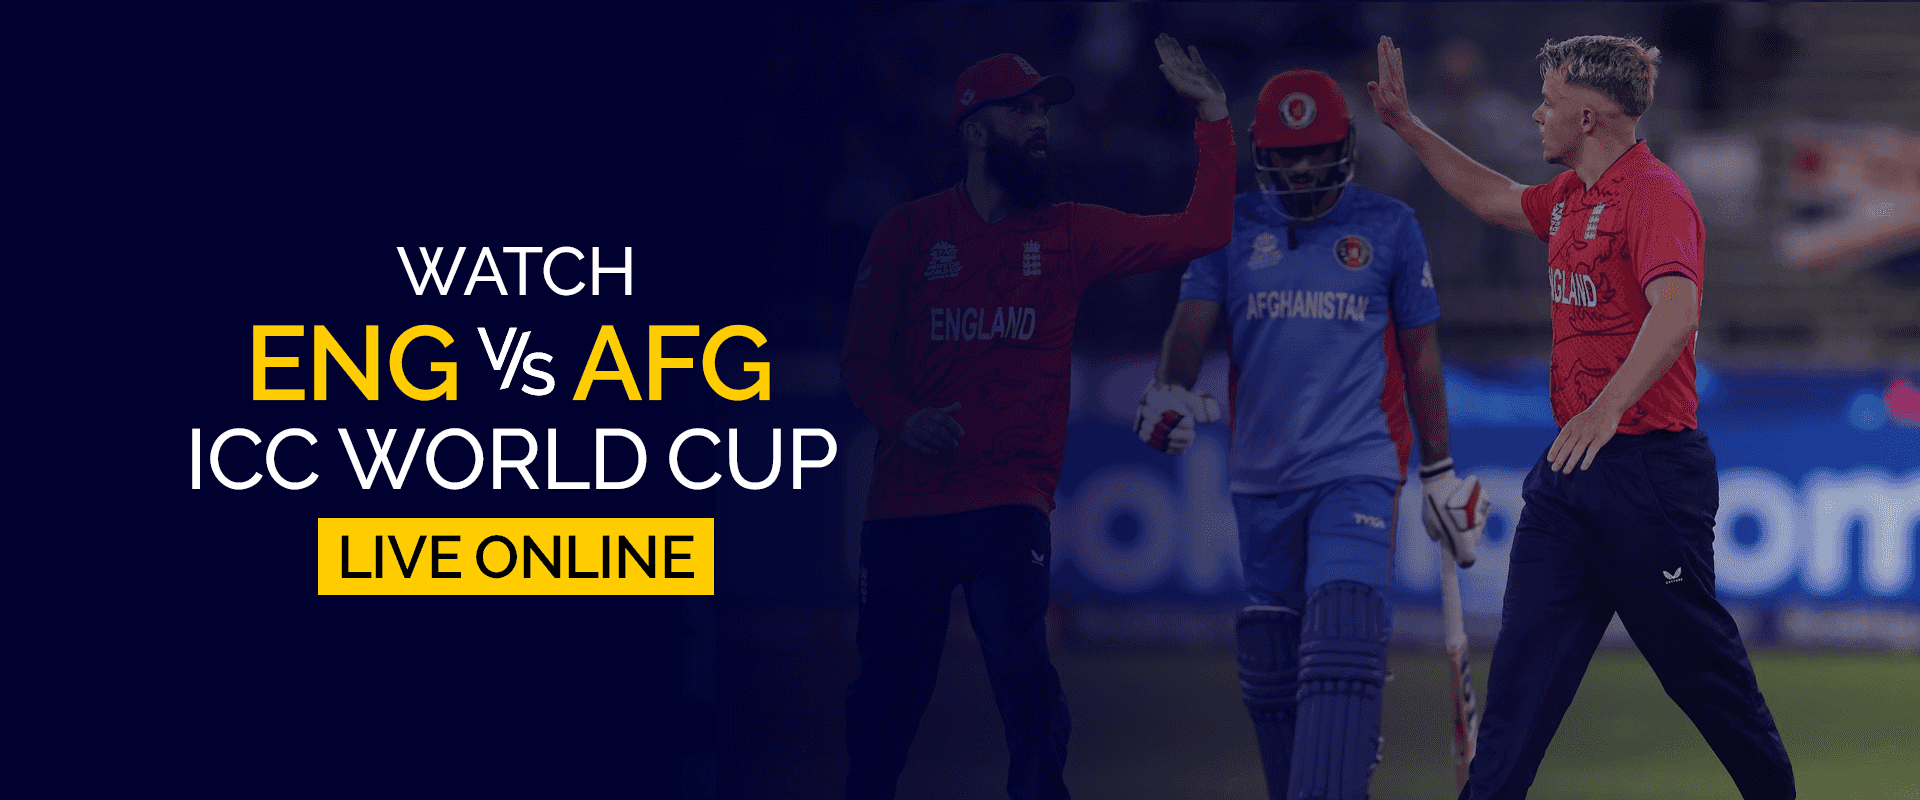 Watch ENG vs AFG ICC World Cup Live Online